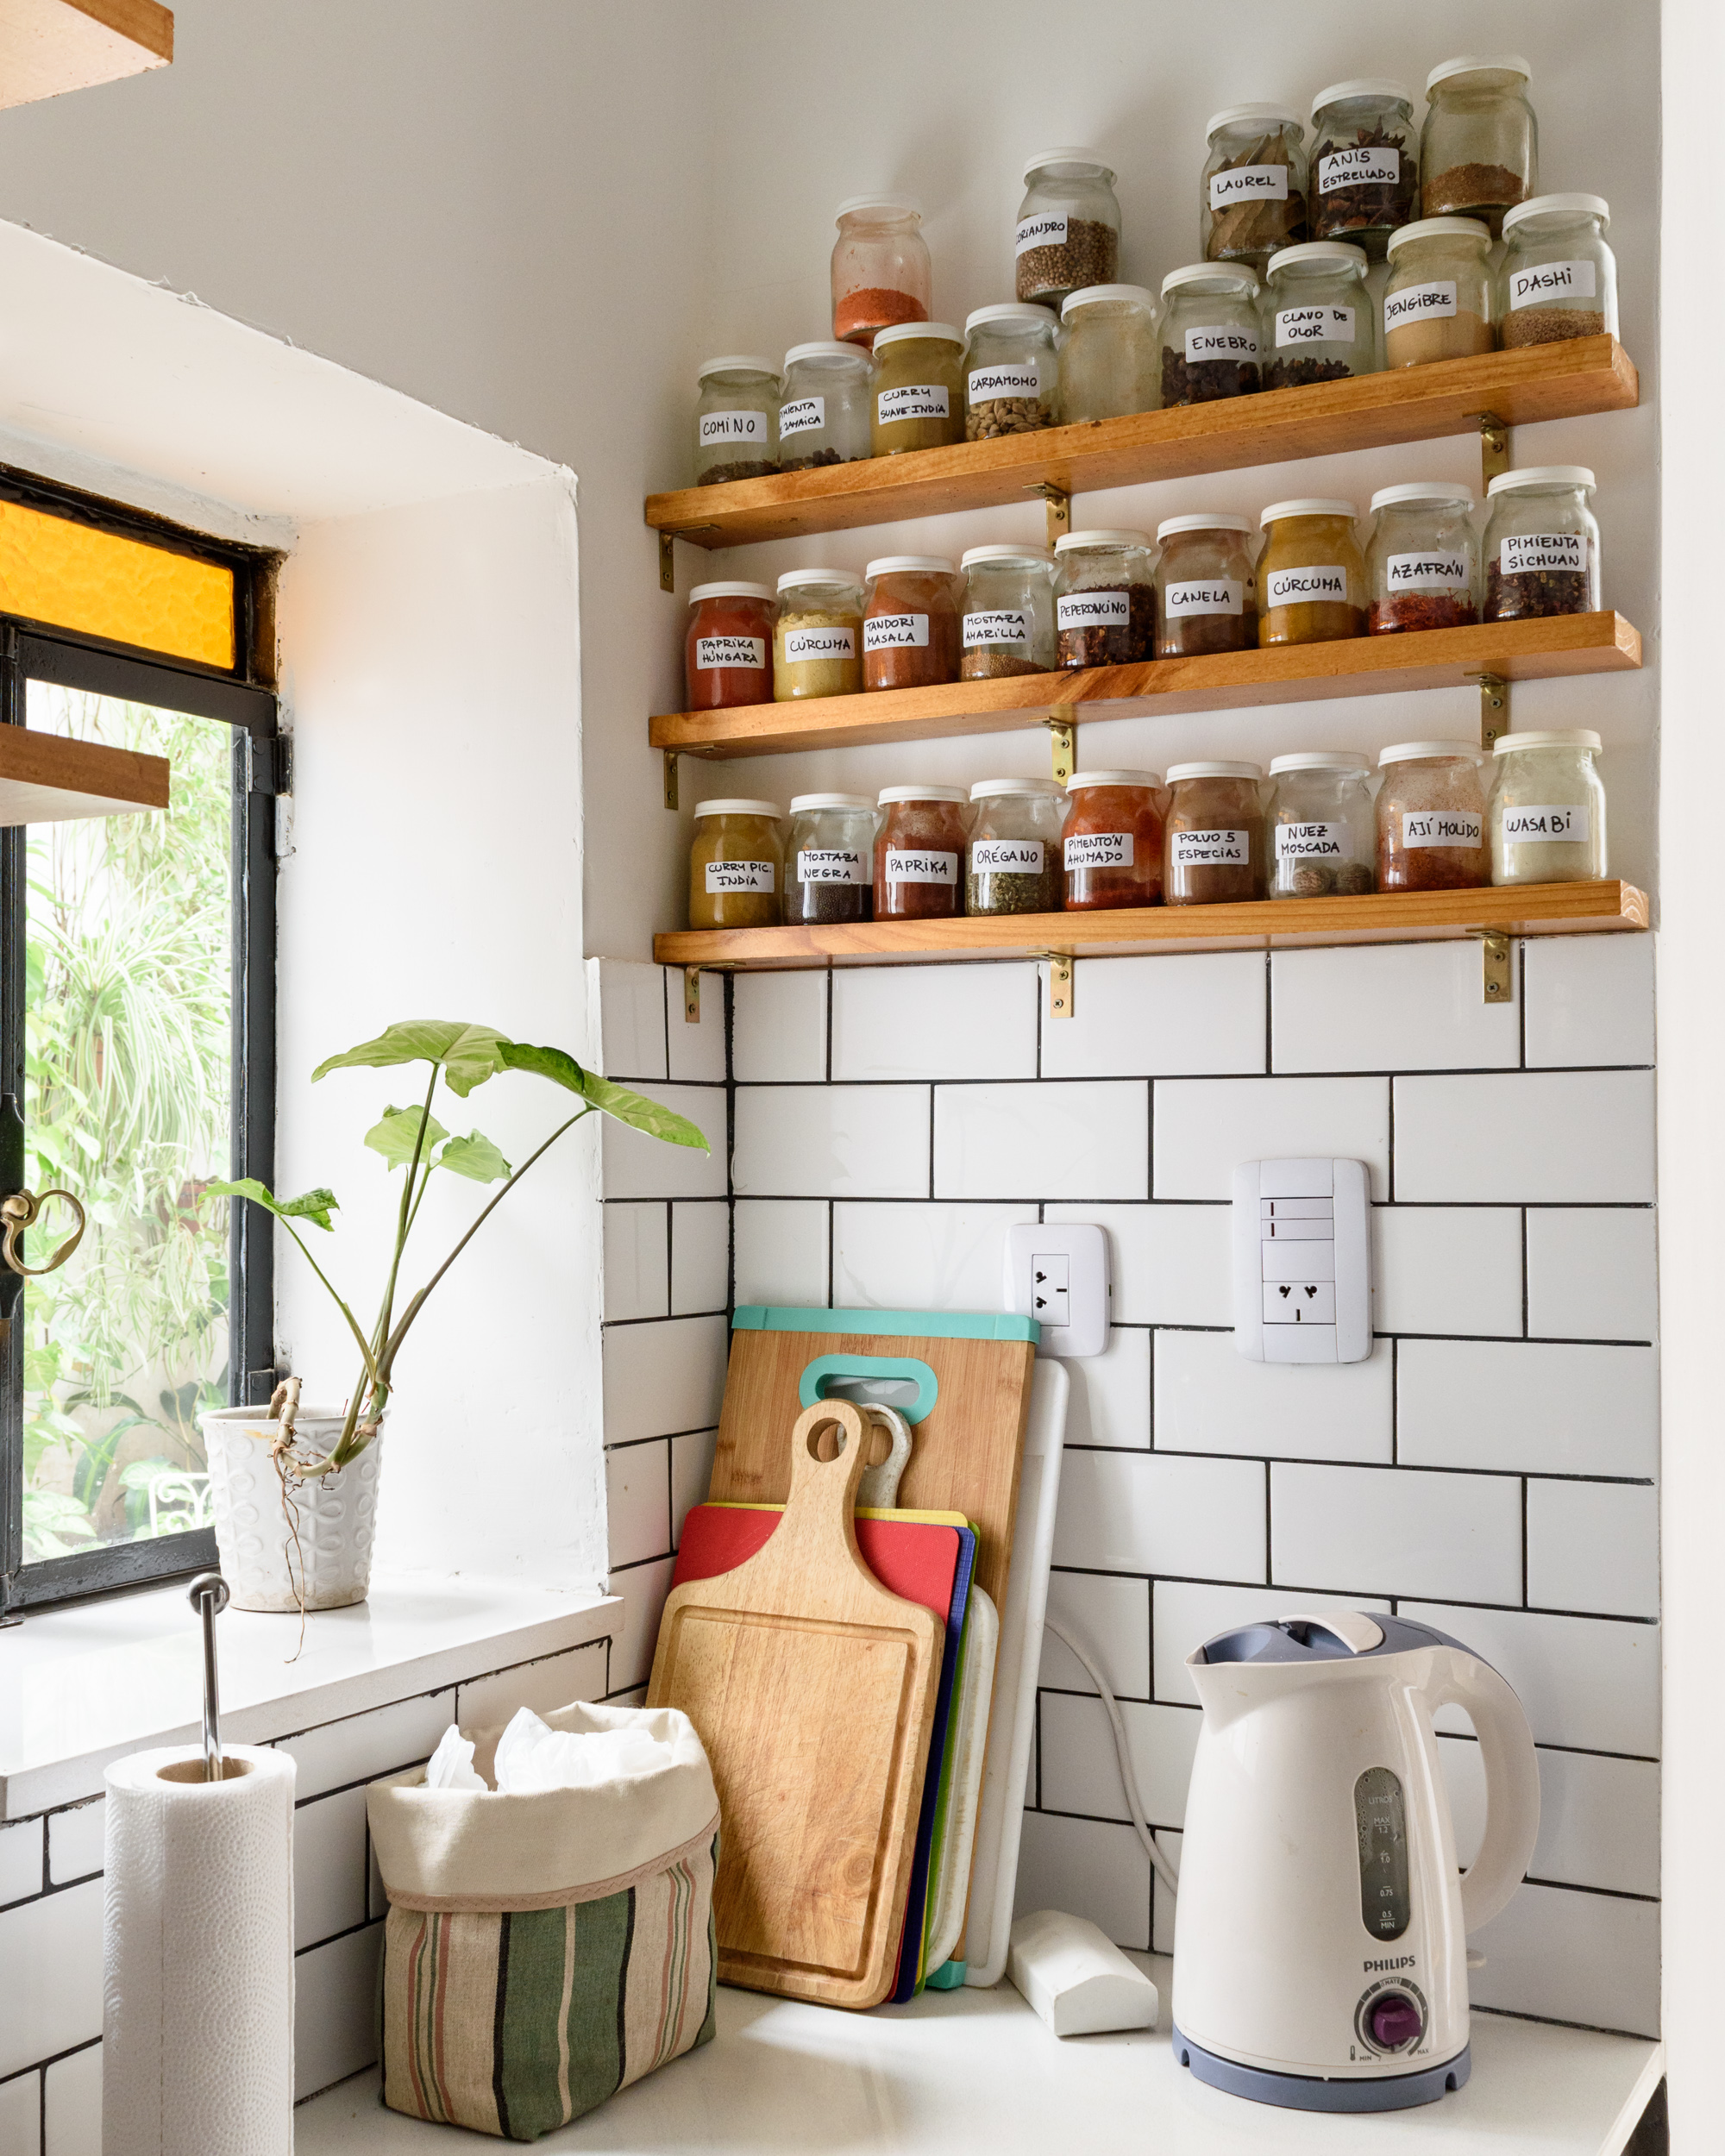 Maximizing Space in a Small Kitchen Pantry with 5 Clever Ideas